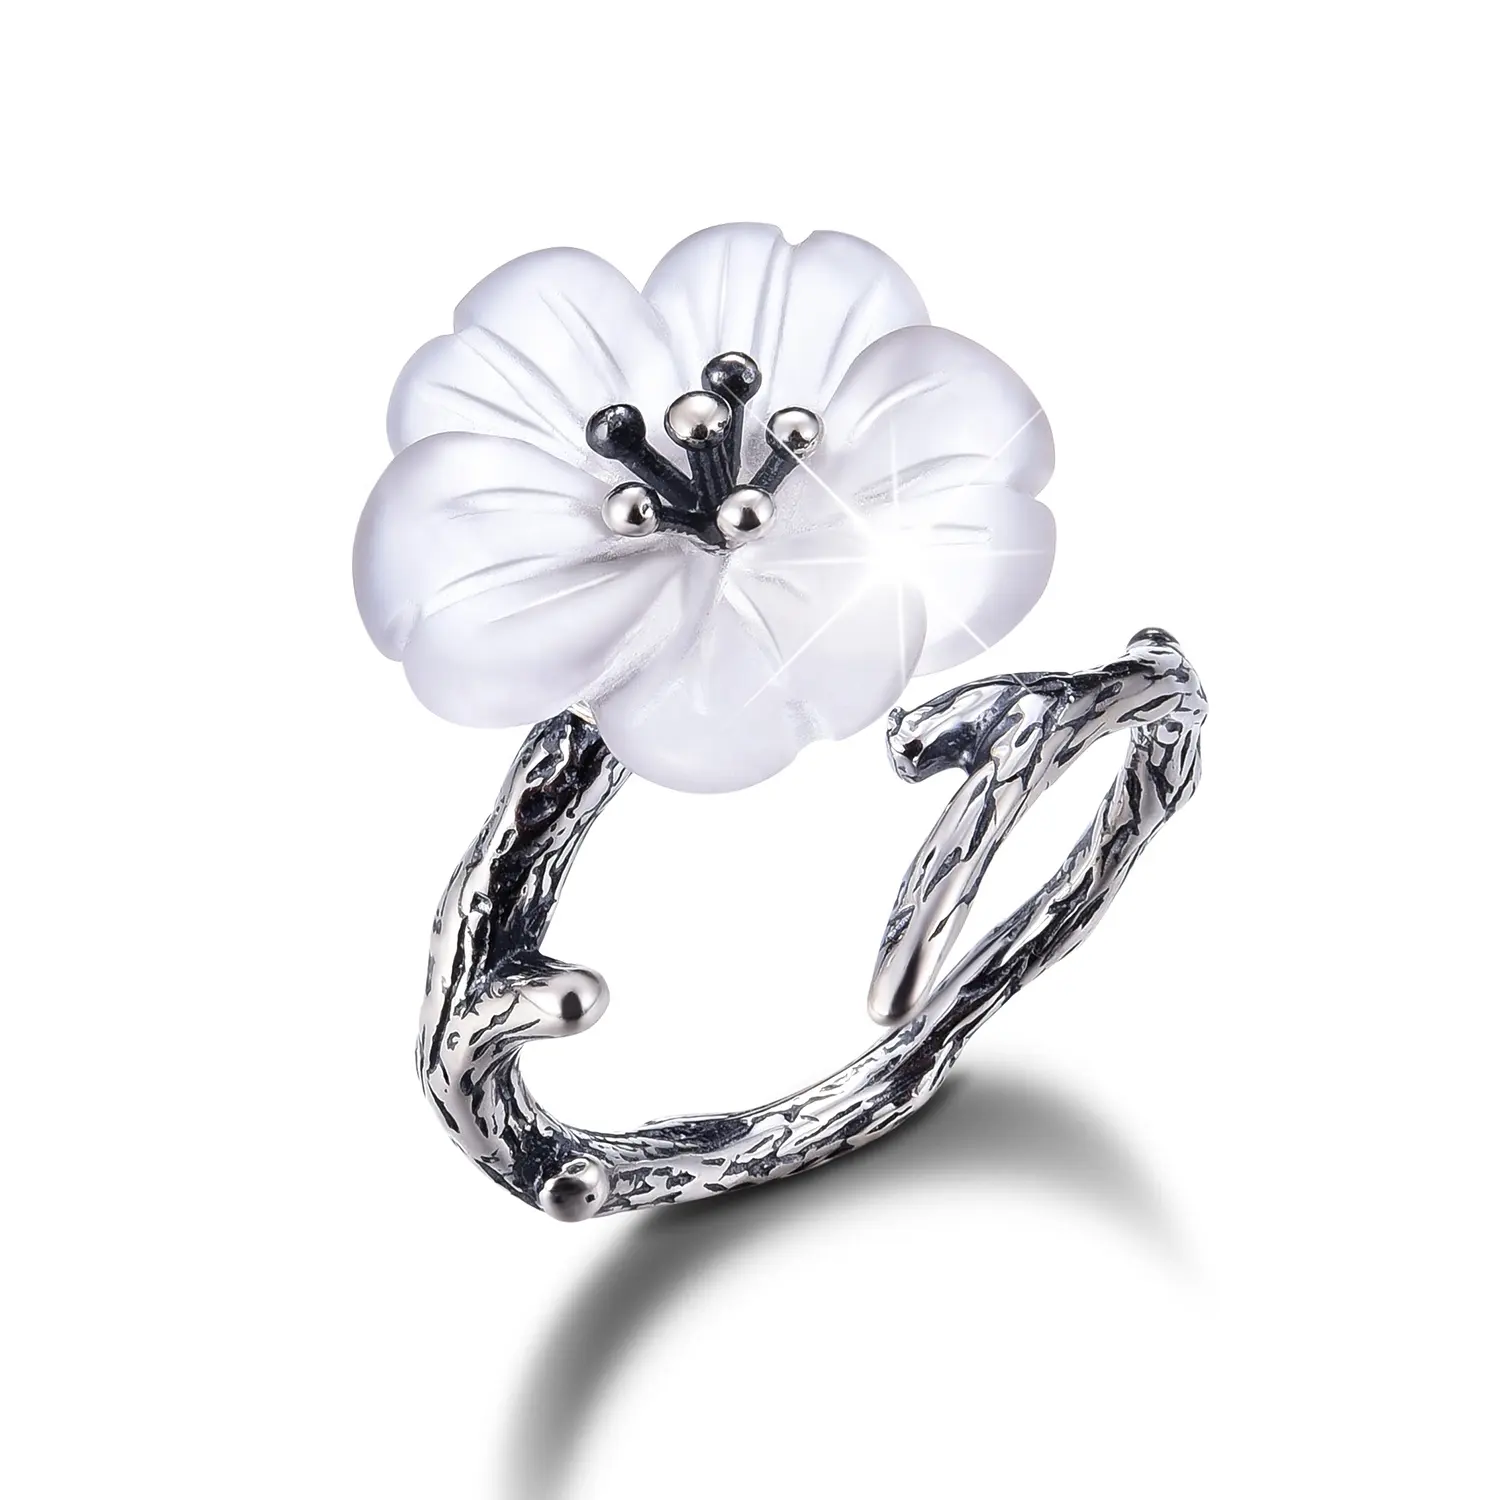 Handmade flower shaped silver jewelry ring